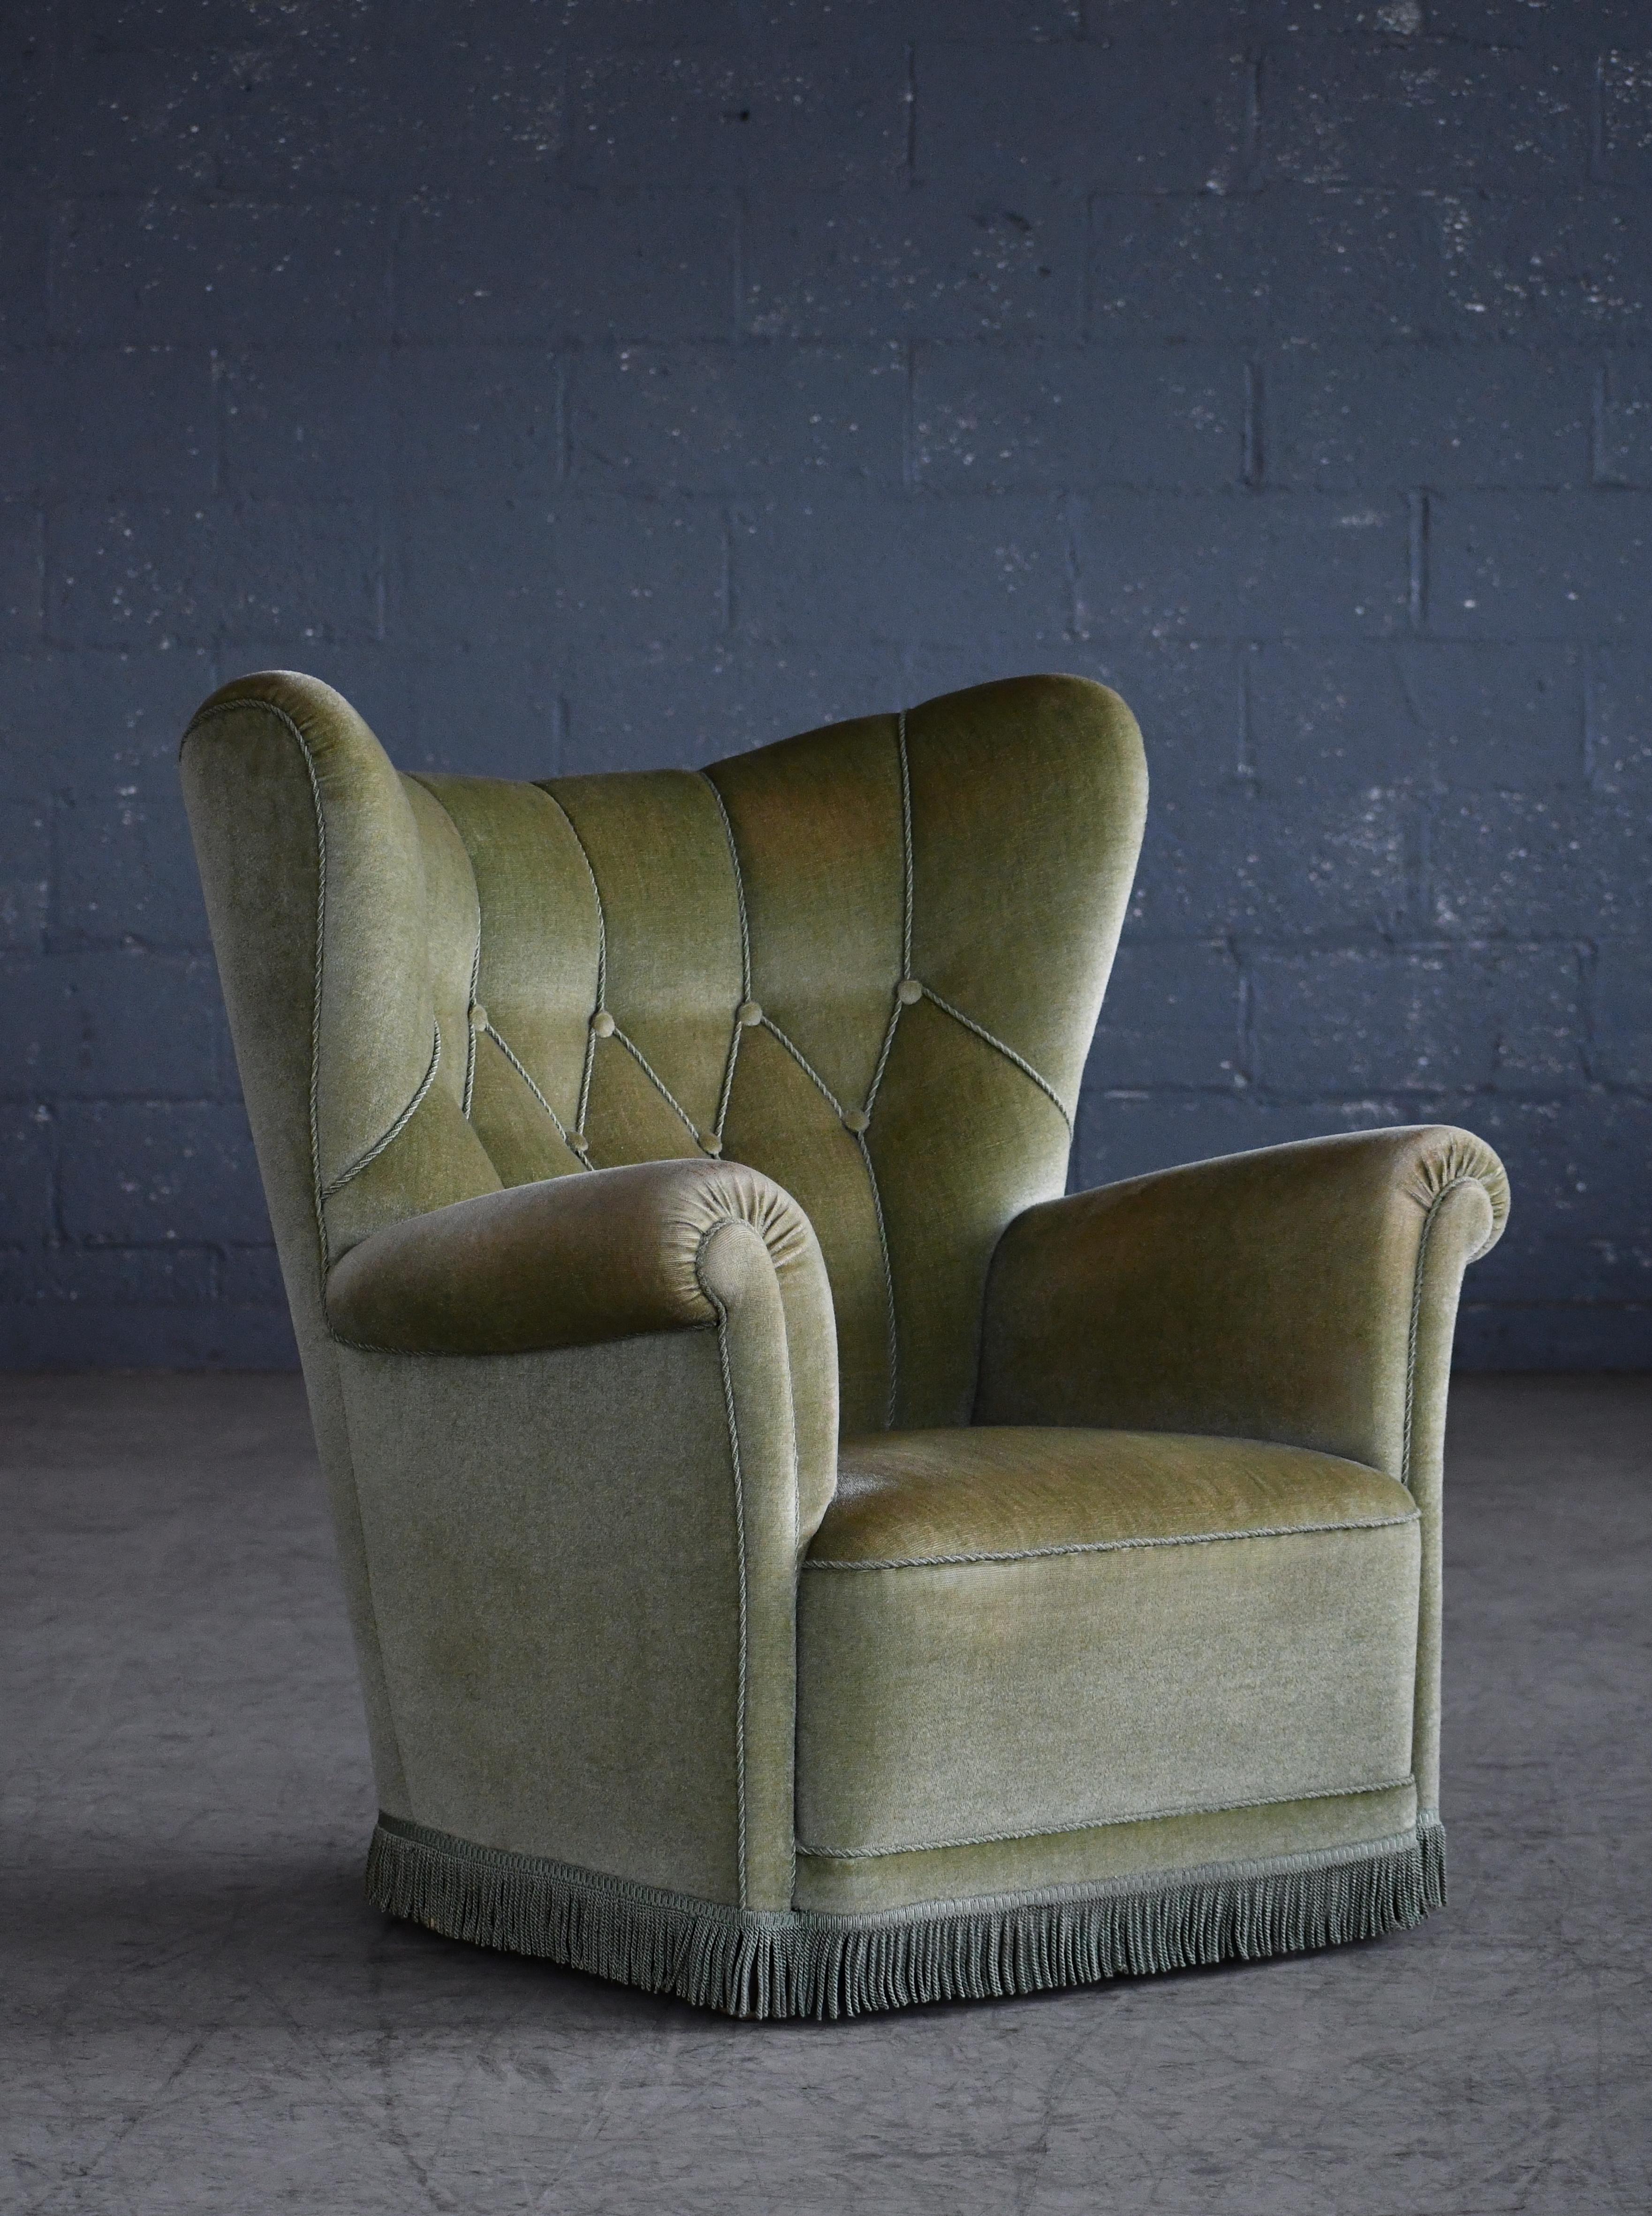 Danish Mid-Century Lounge or Club Chair in Green Mohair, 1940's For Sale 1